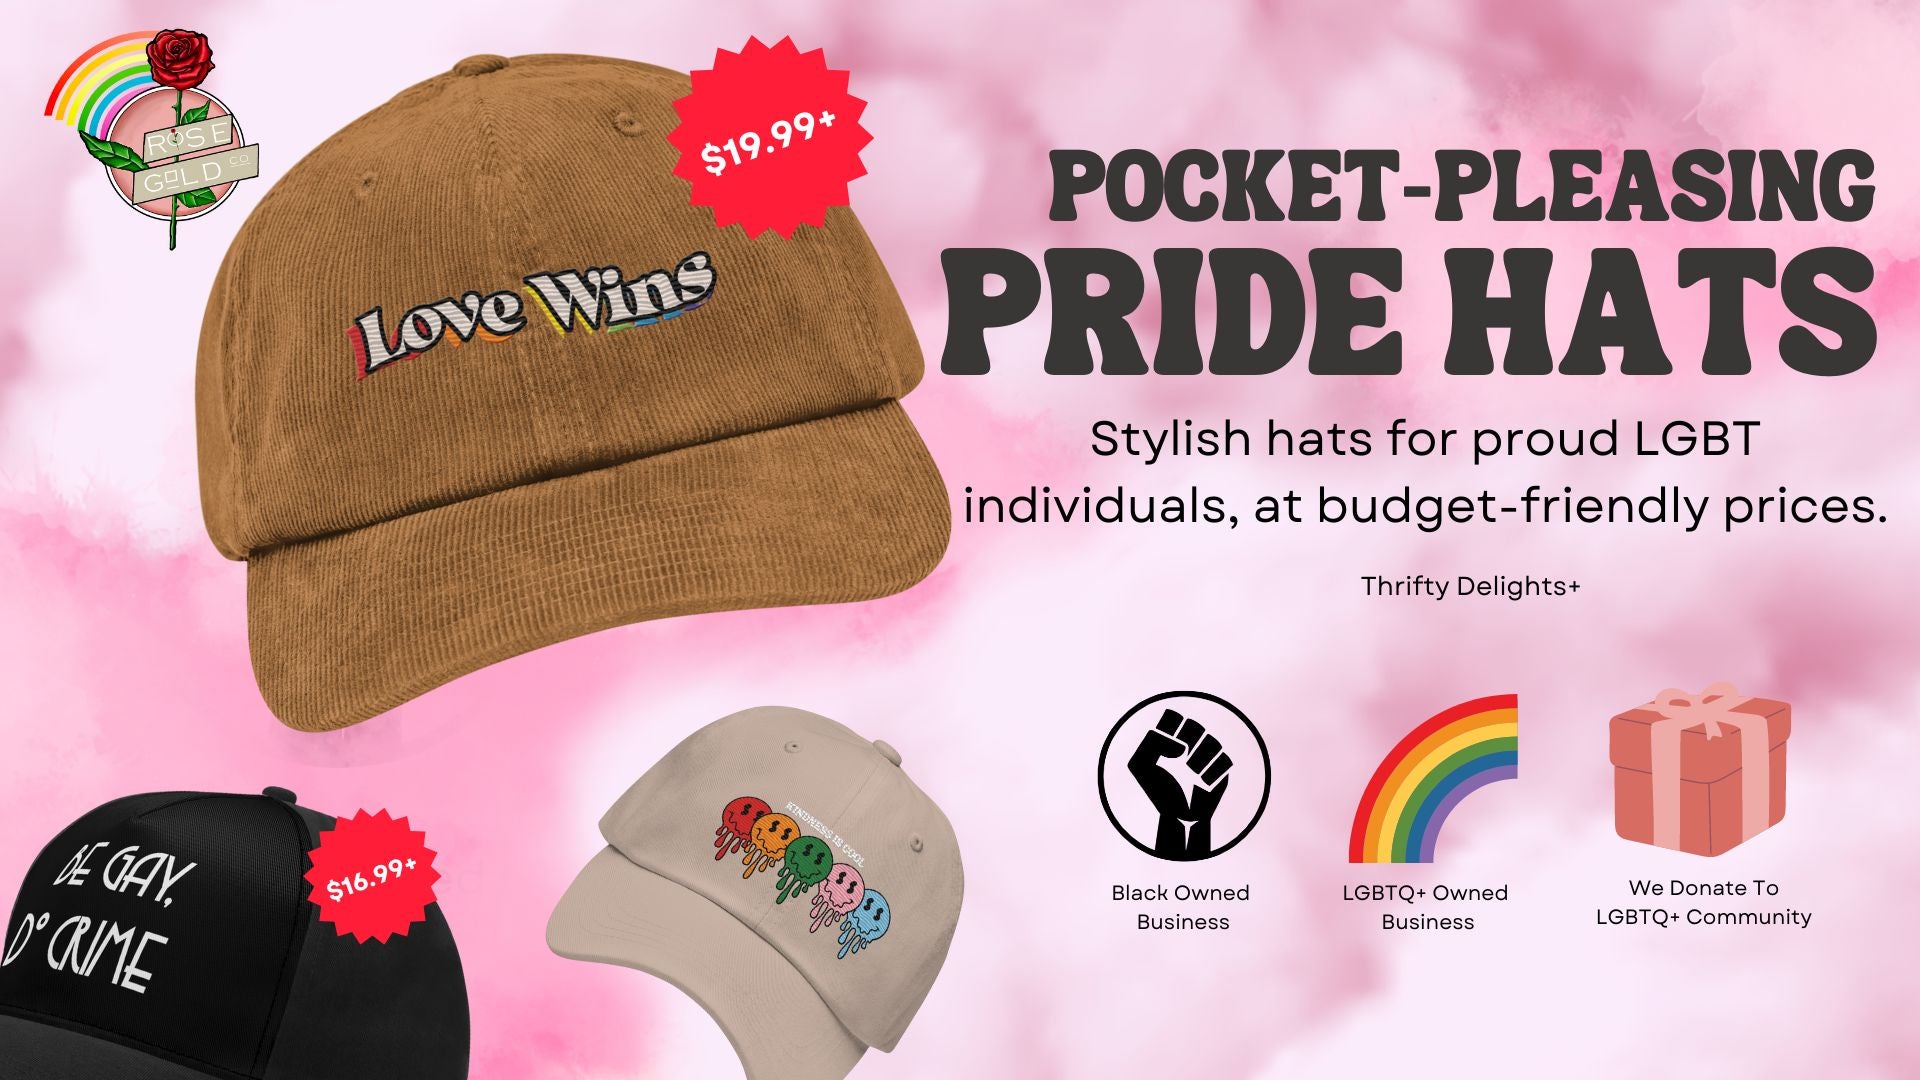 Pocket please pride hats,  Stylish hats for proud queer individuals, offered at budget-friendly prices.